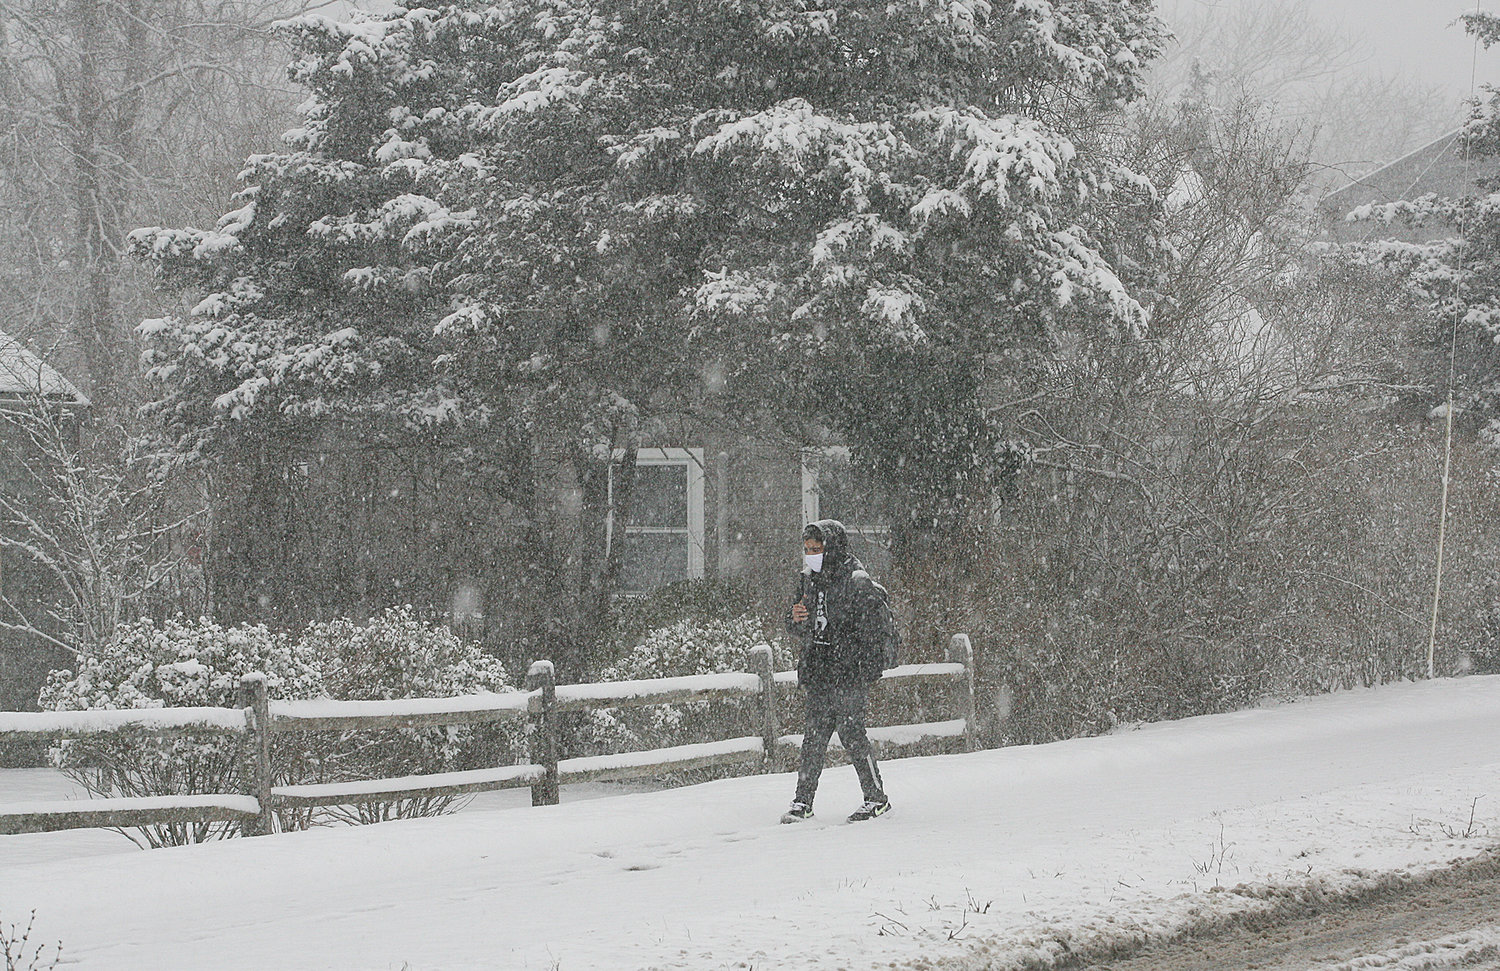 A person, mask on, makes his way through the snow along Surfside Road near the schools.